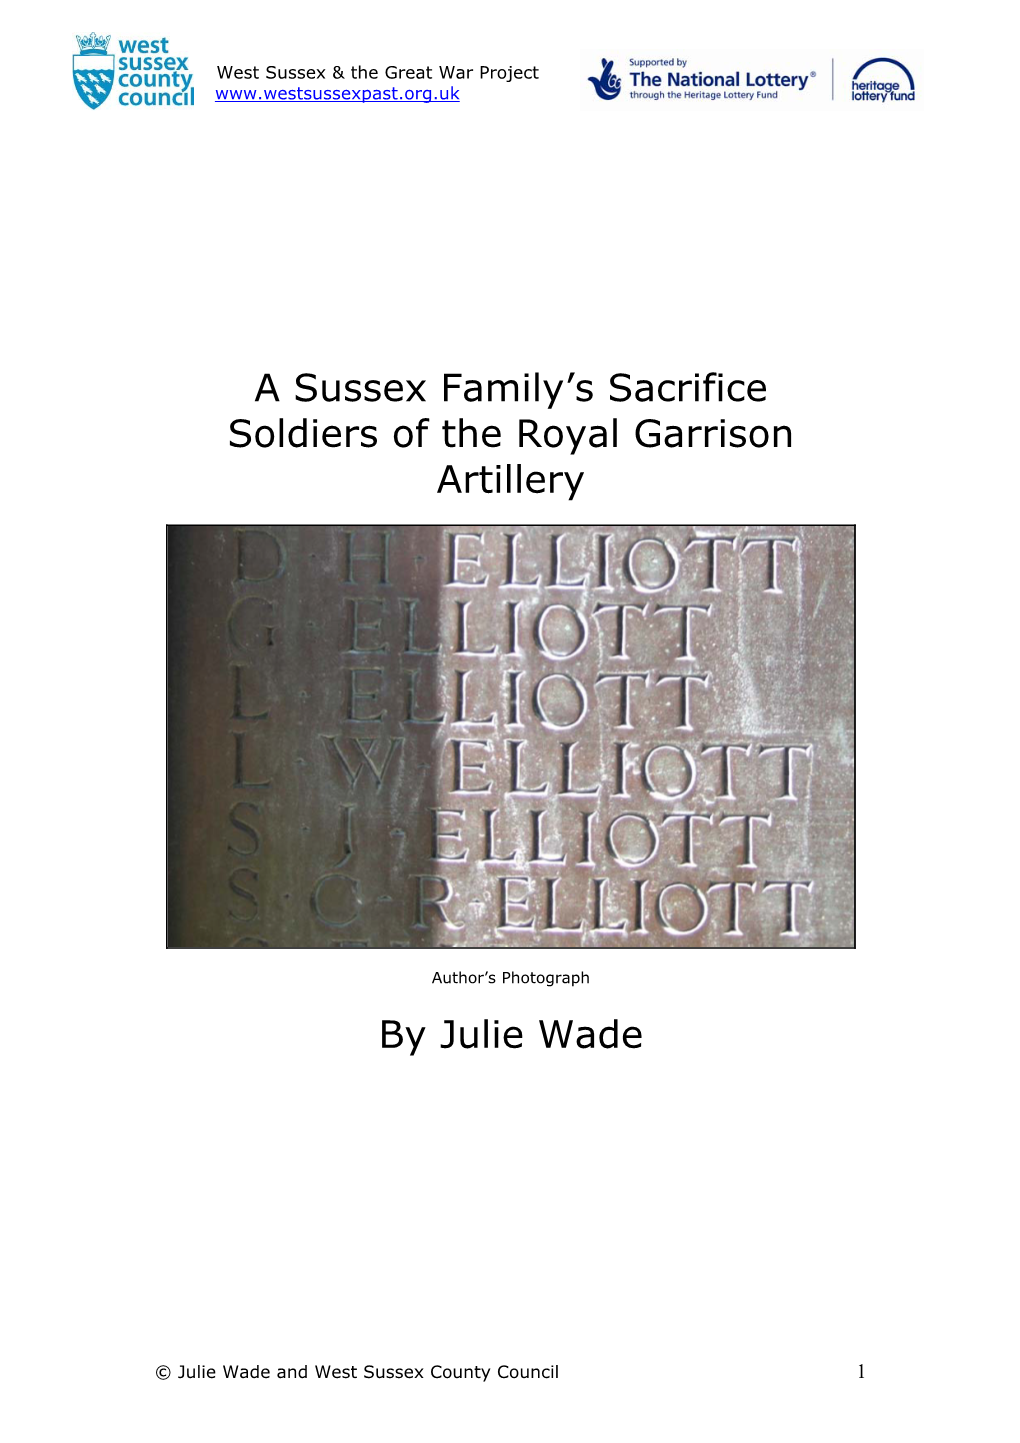 A Sussex Family's Sacrifice Soldiers of the Royal Garrison Artillery